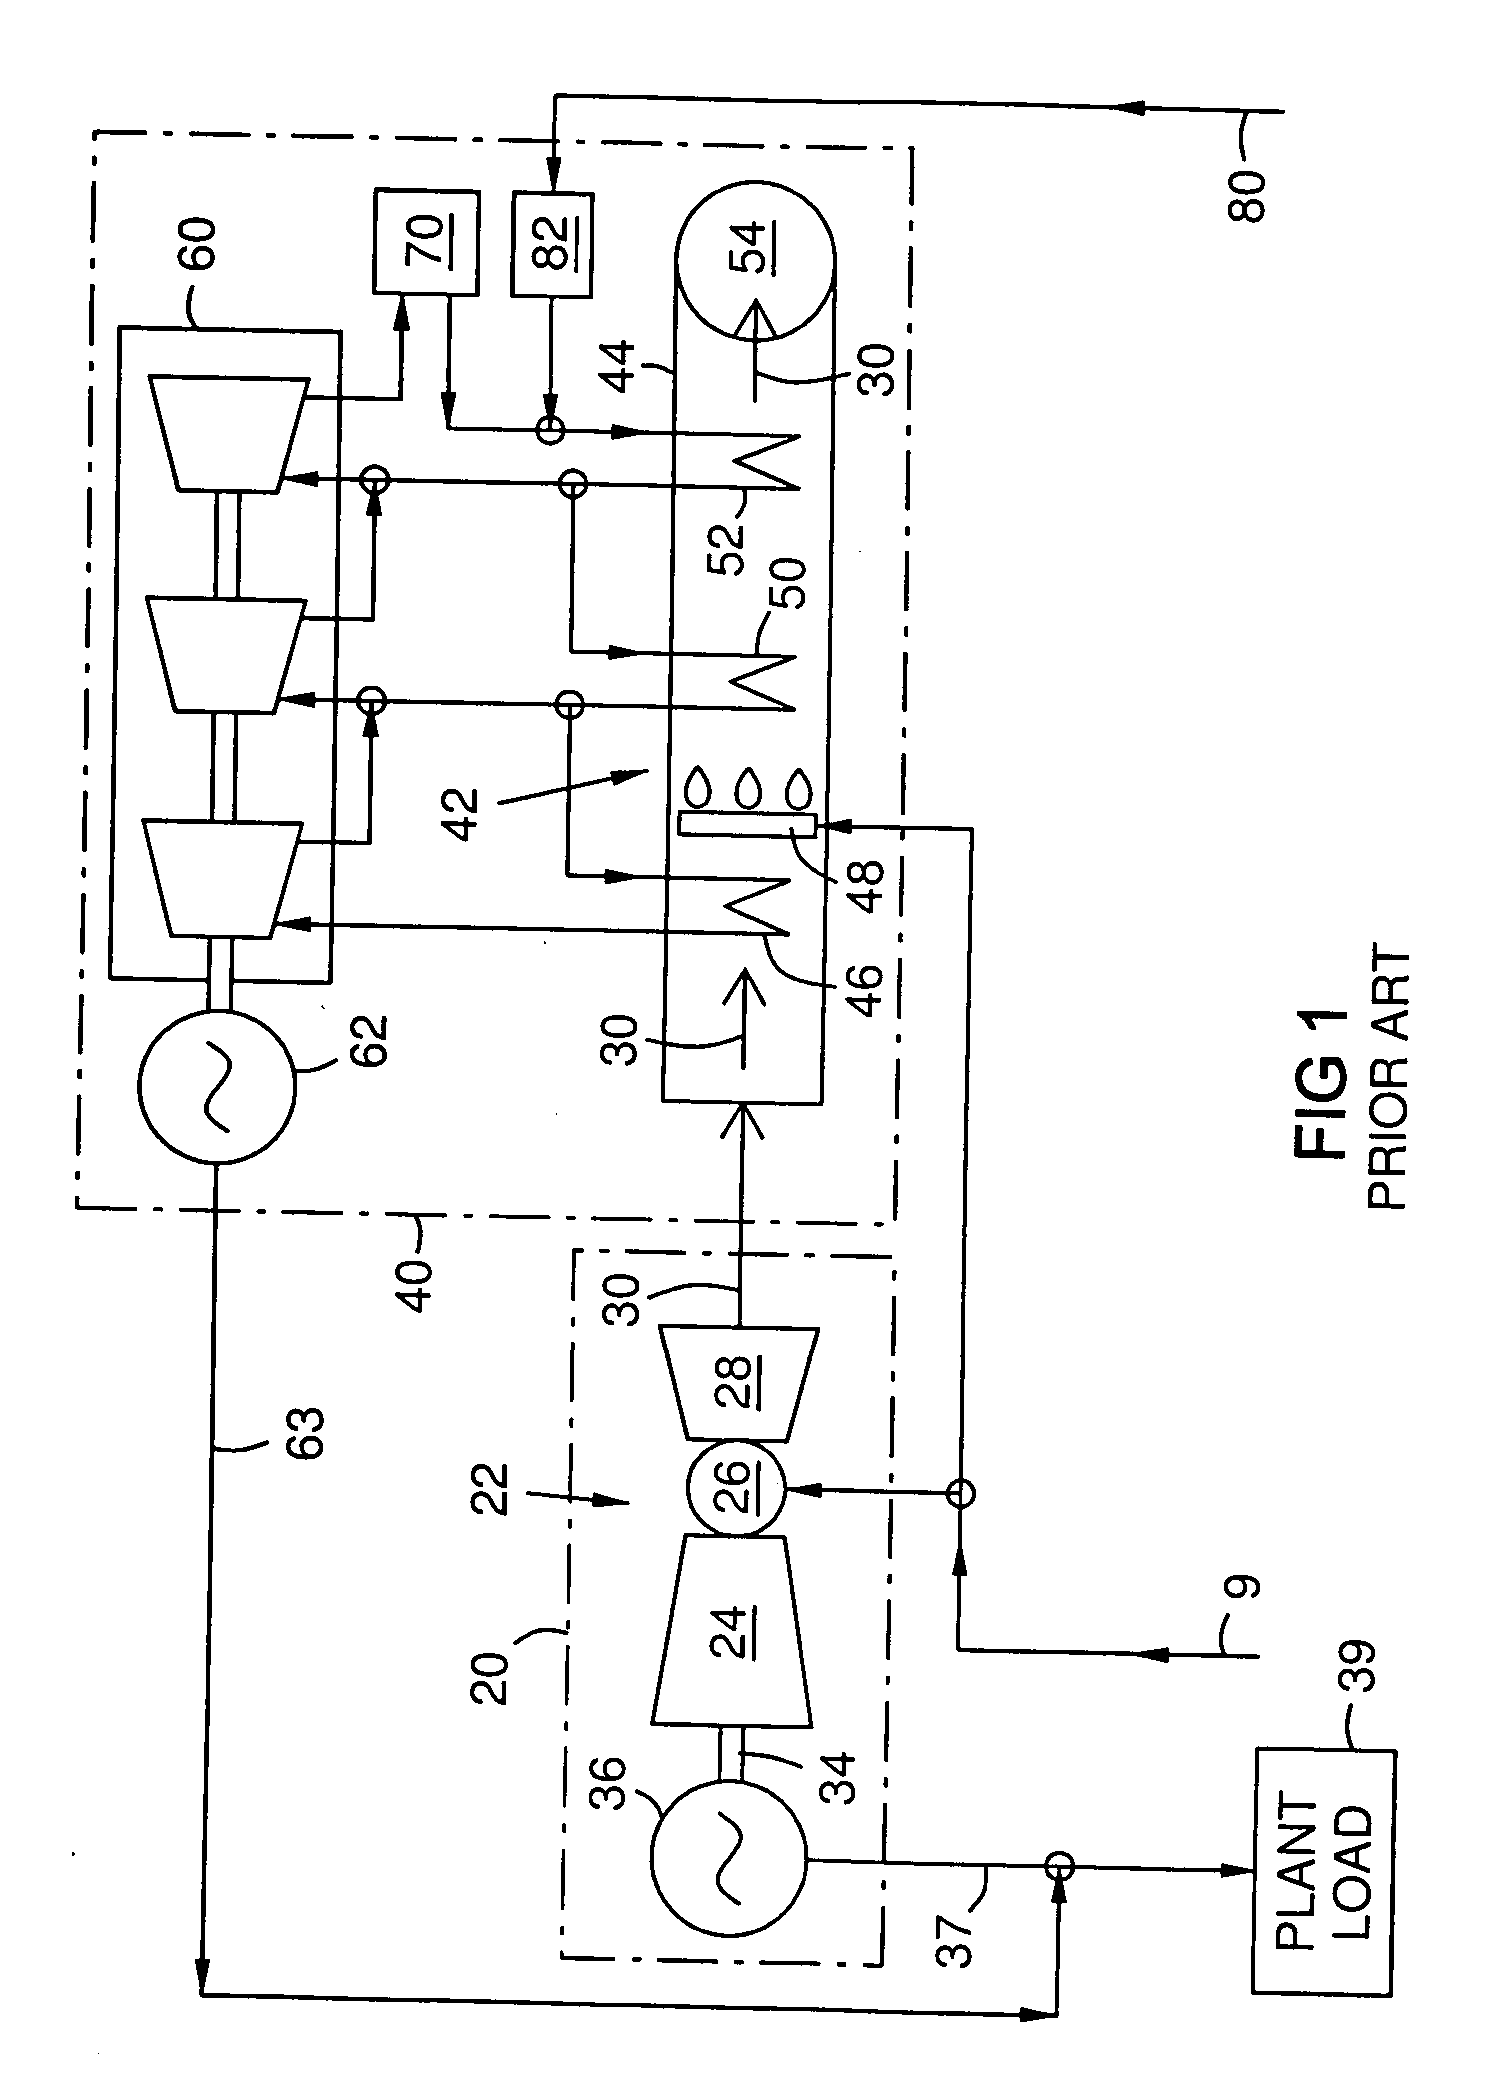 Exhaust heat augmentation in a combined cycle power plant